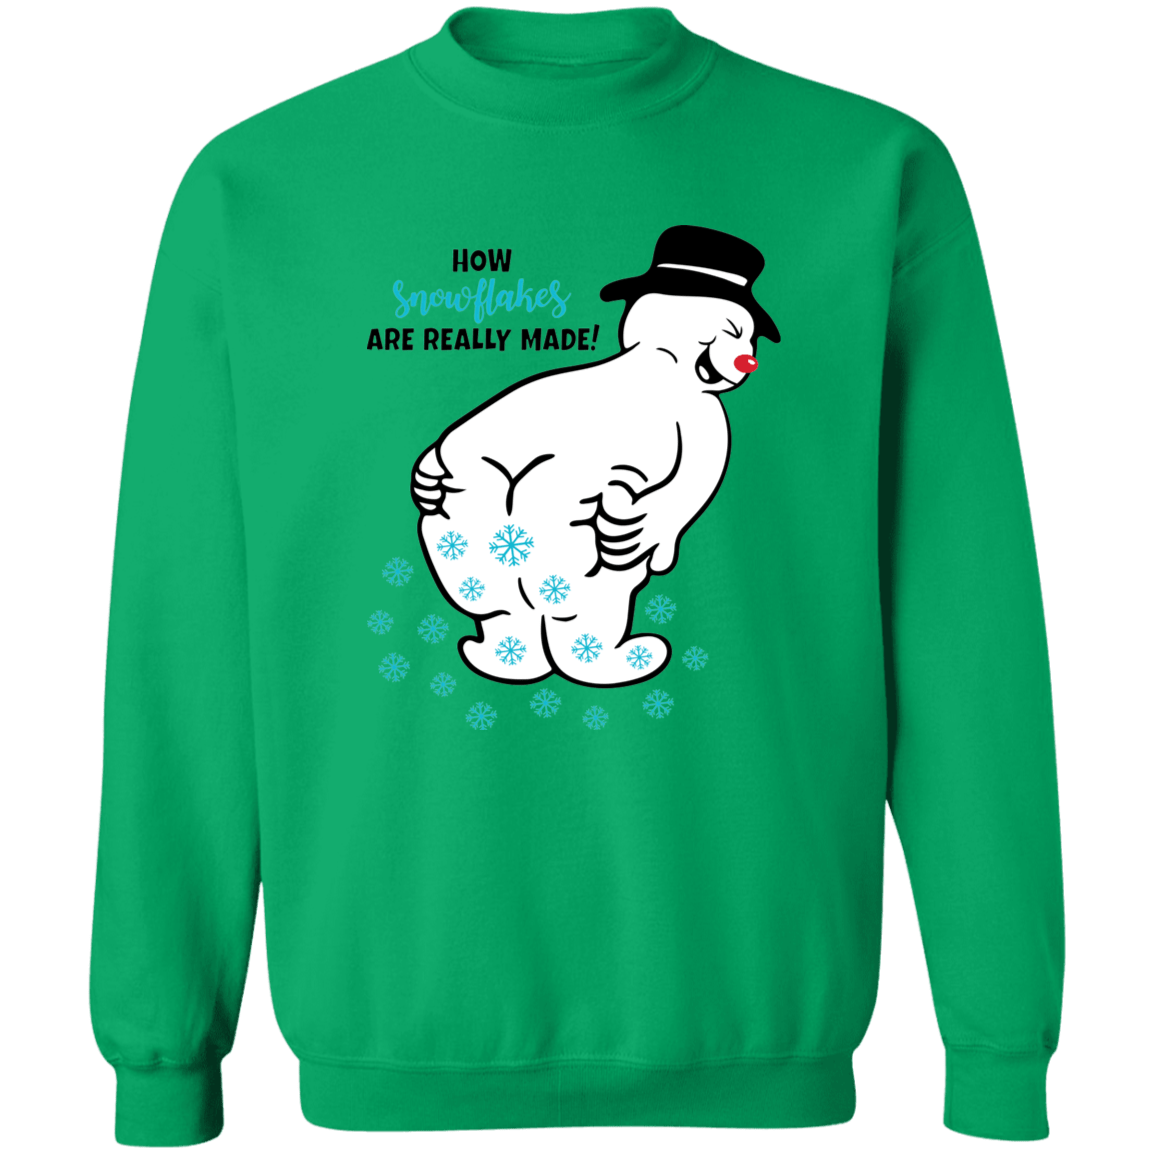 How Snowflakes are Made Sweatshirt